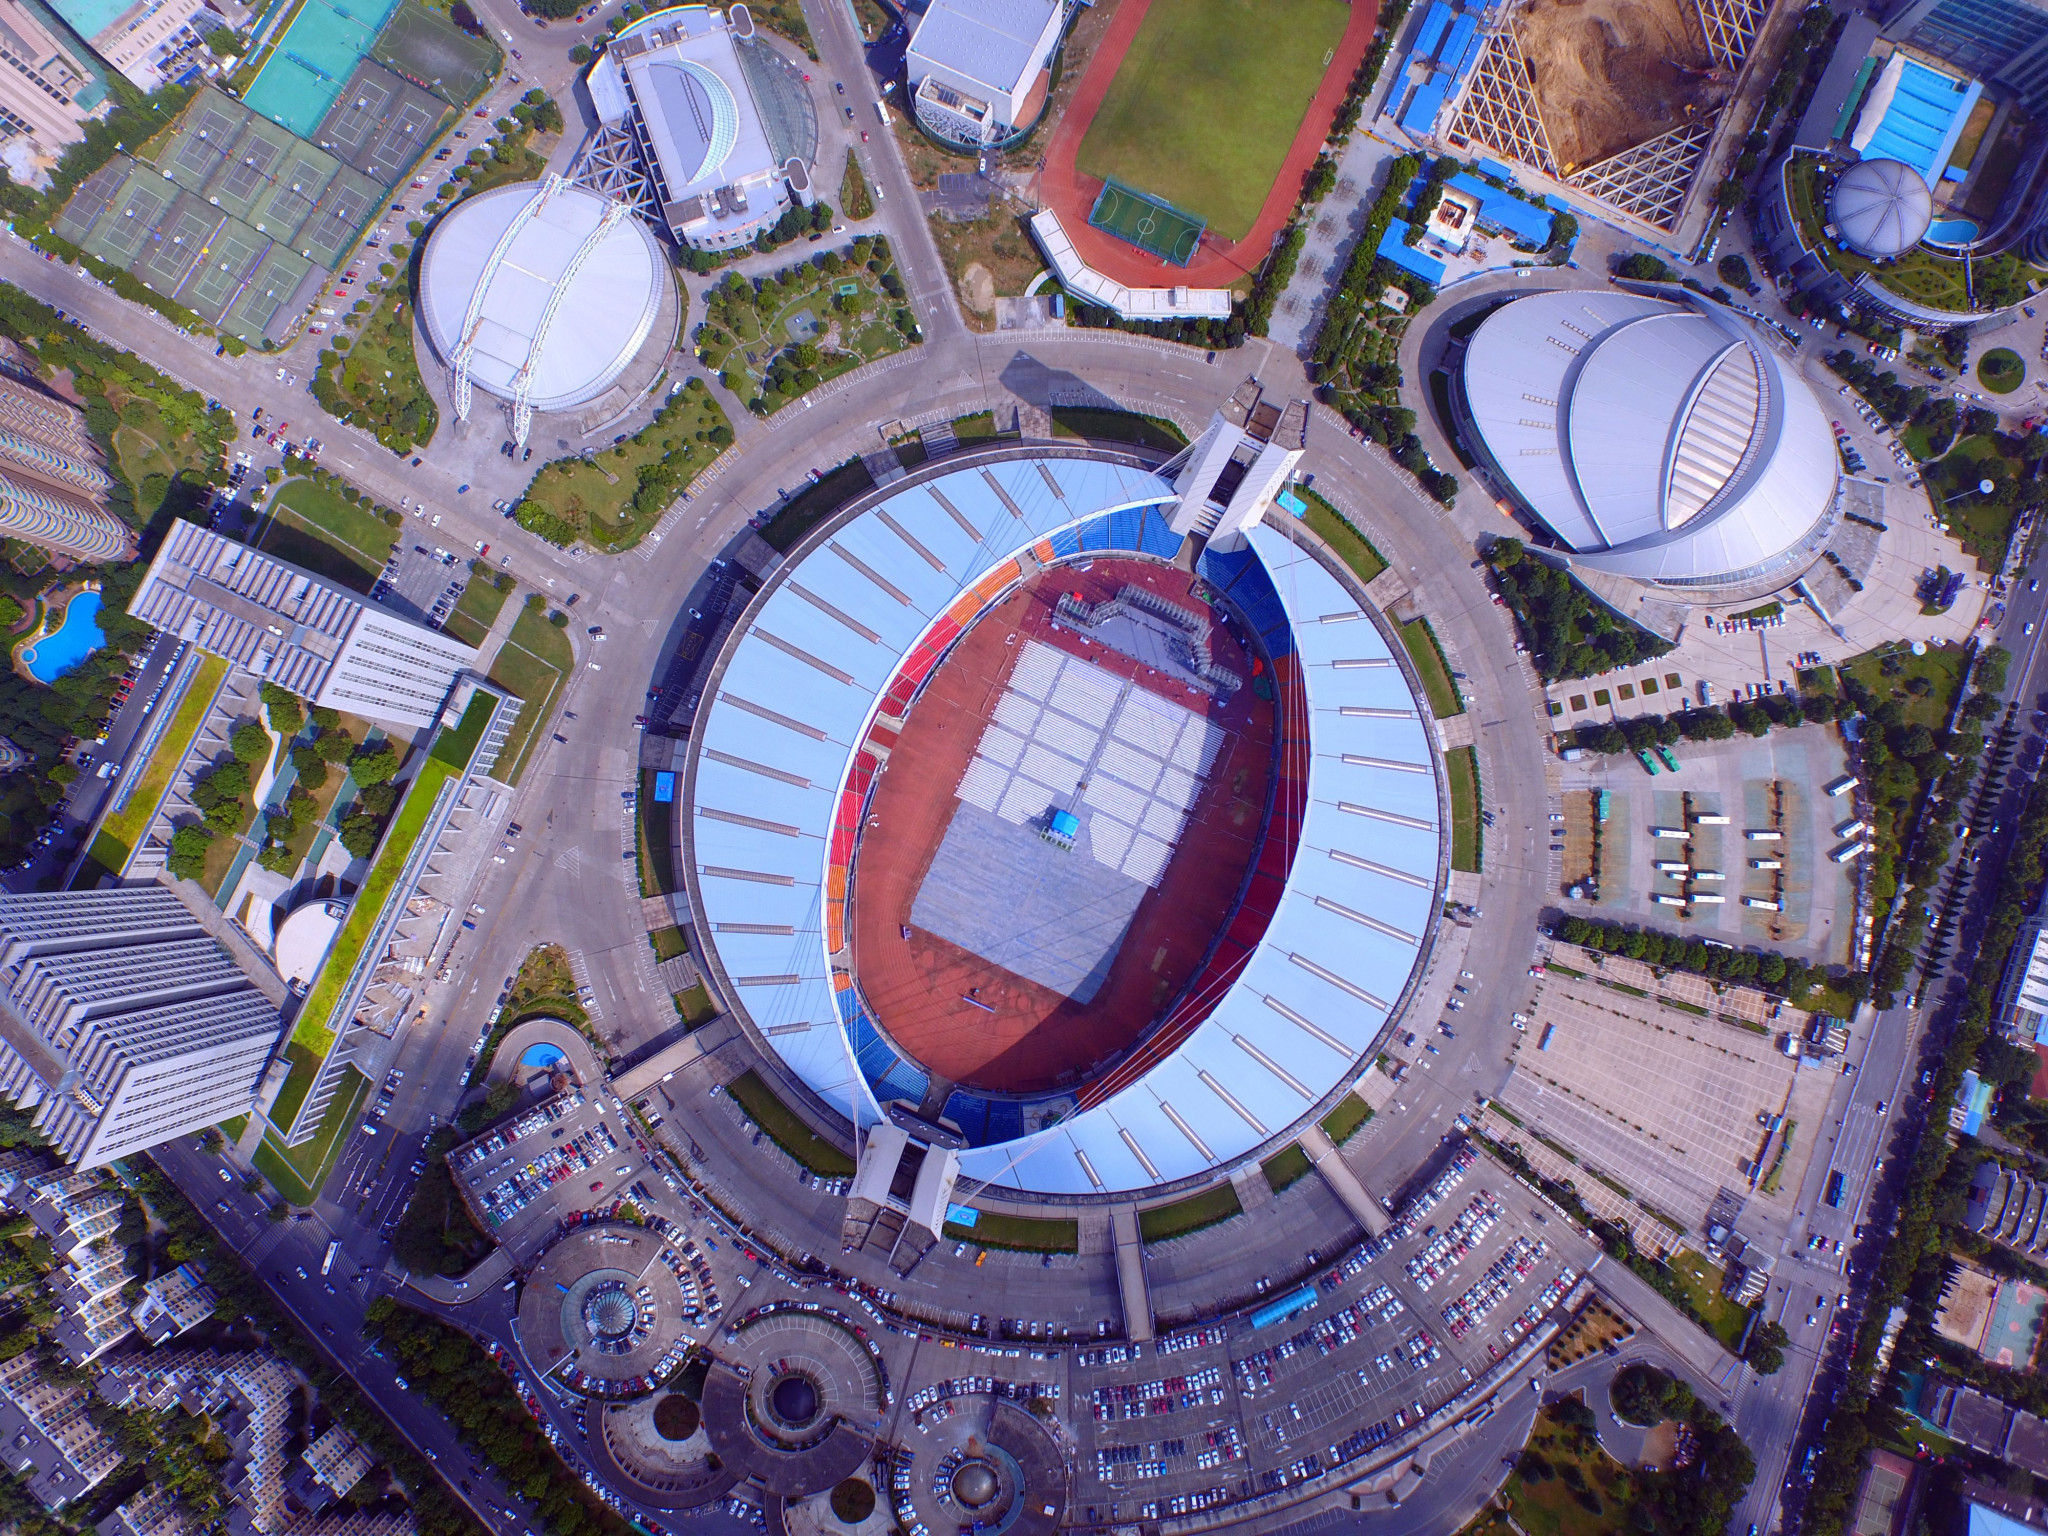 The Yellow Dragon sports complex is ready to welcome supporters to the Hangzhou 2022 Asian Games ©Getty Images